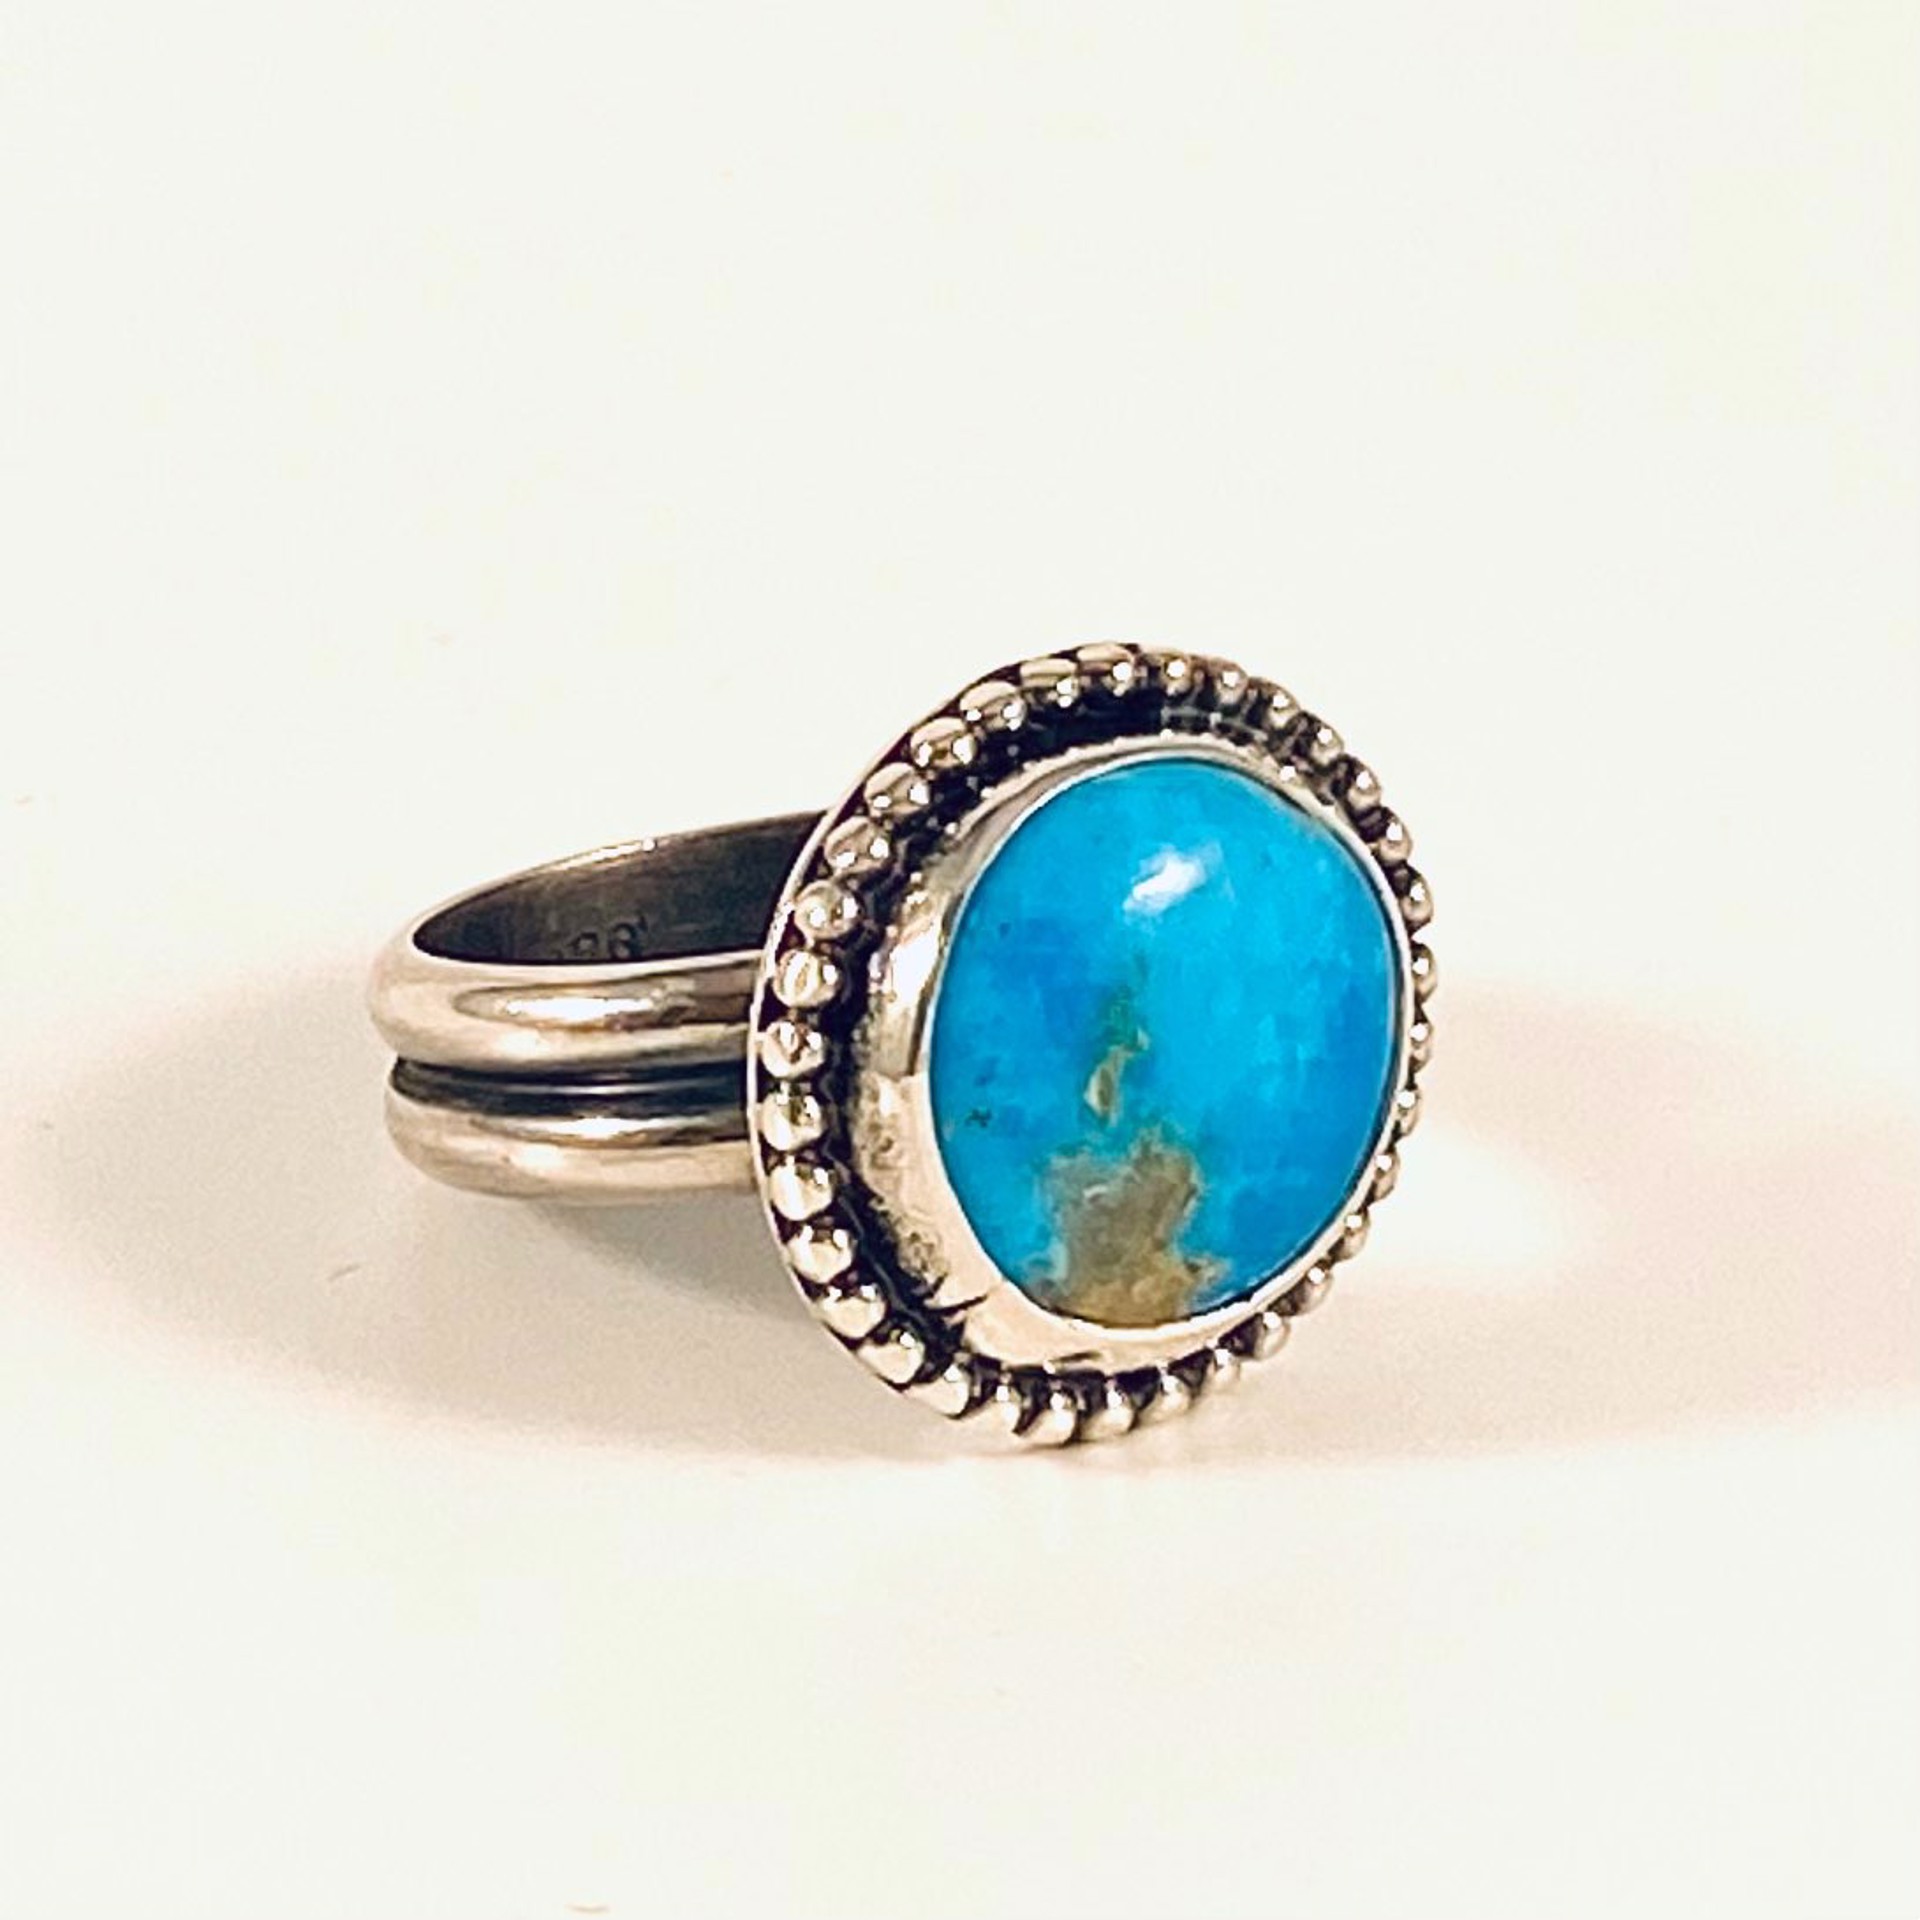 AB22-33 Round Morenci Turquoise Ring sz6.5 by Anne Bivens